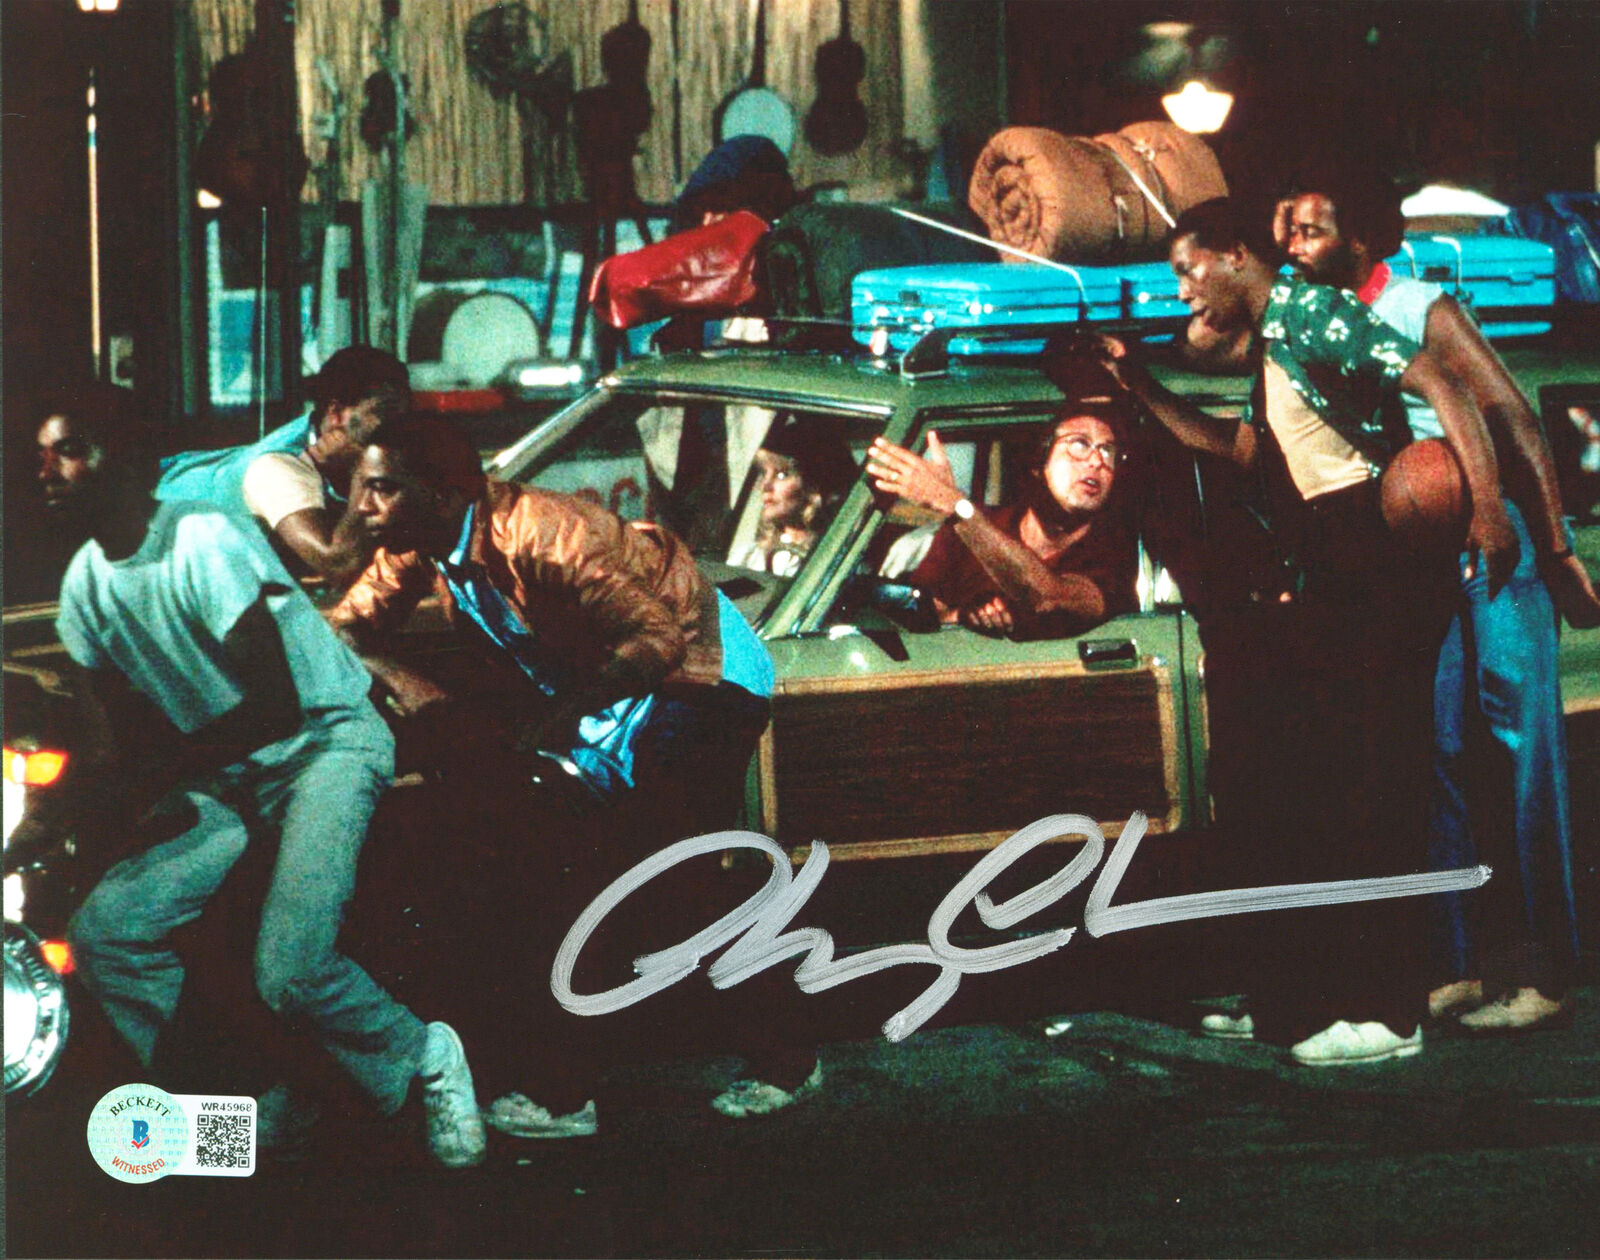 Chevy Chase Vacation Authentic Signed 8x10 Directions Photo Poster painting BAS Witnessed